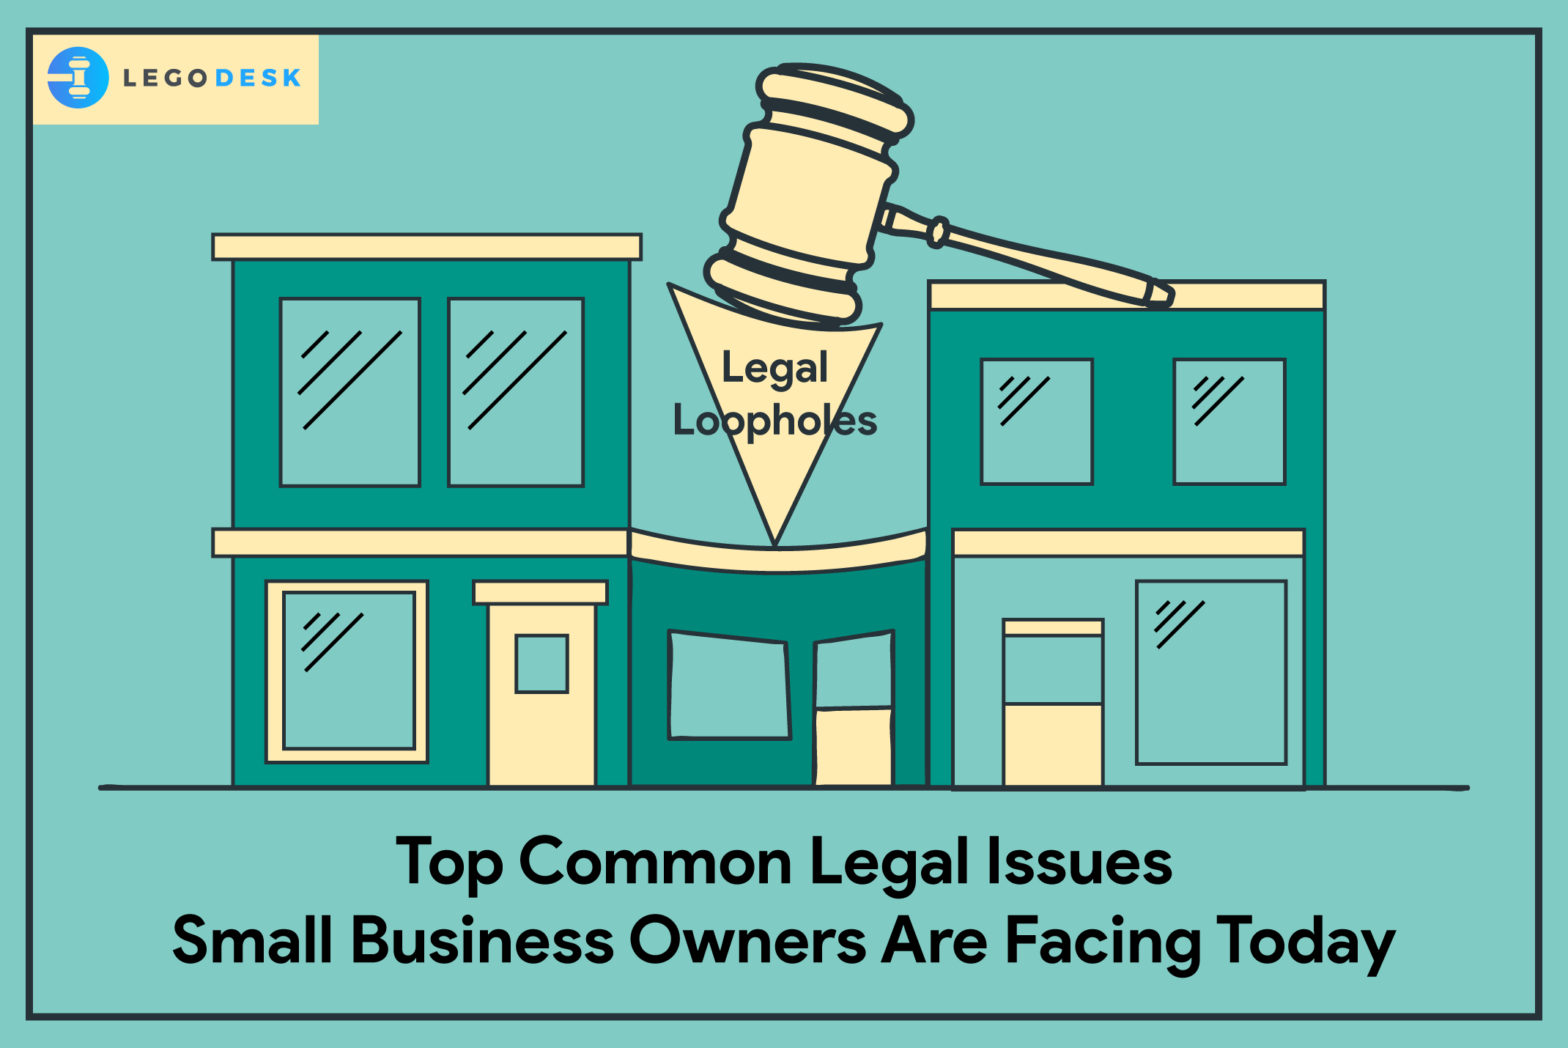 Top Common Legal Issues Small Business Owners Are Facing Today